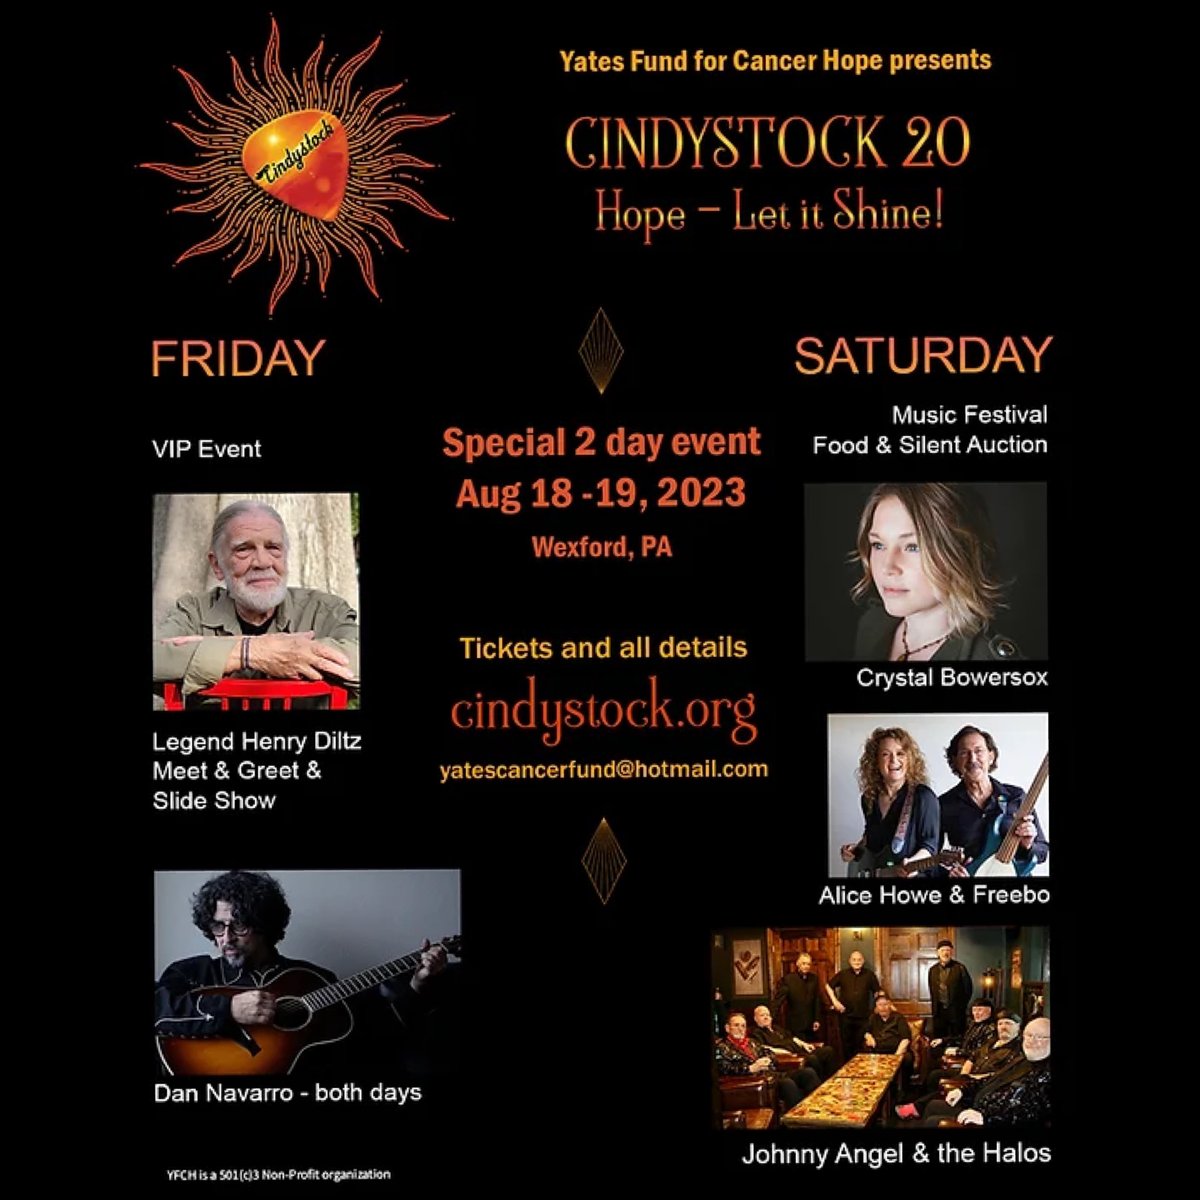 #ICYMI on #MazdaMonday, there is so much to do in #Pittsburgh this weekend! Including the 20th annual #Cindystock Music Festival featuring live tunes, food and music benefiting great cause! #SupportLocal #PittsburghEvents #Mazda 

Get event tickets here: cindystock.org